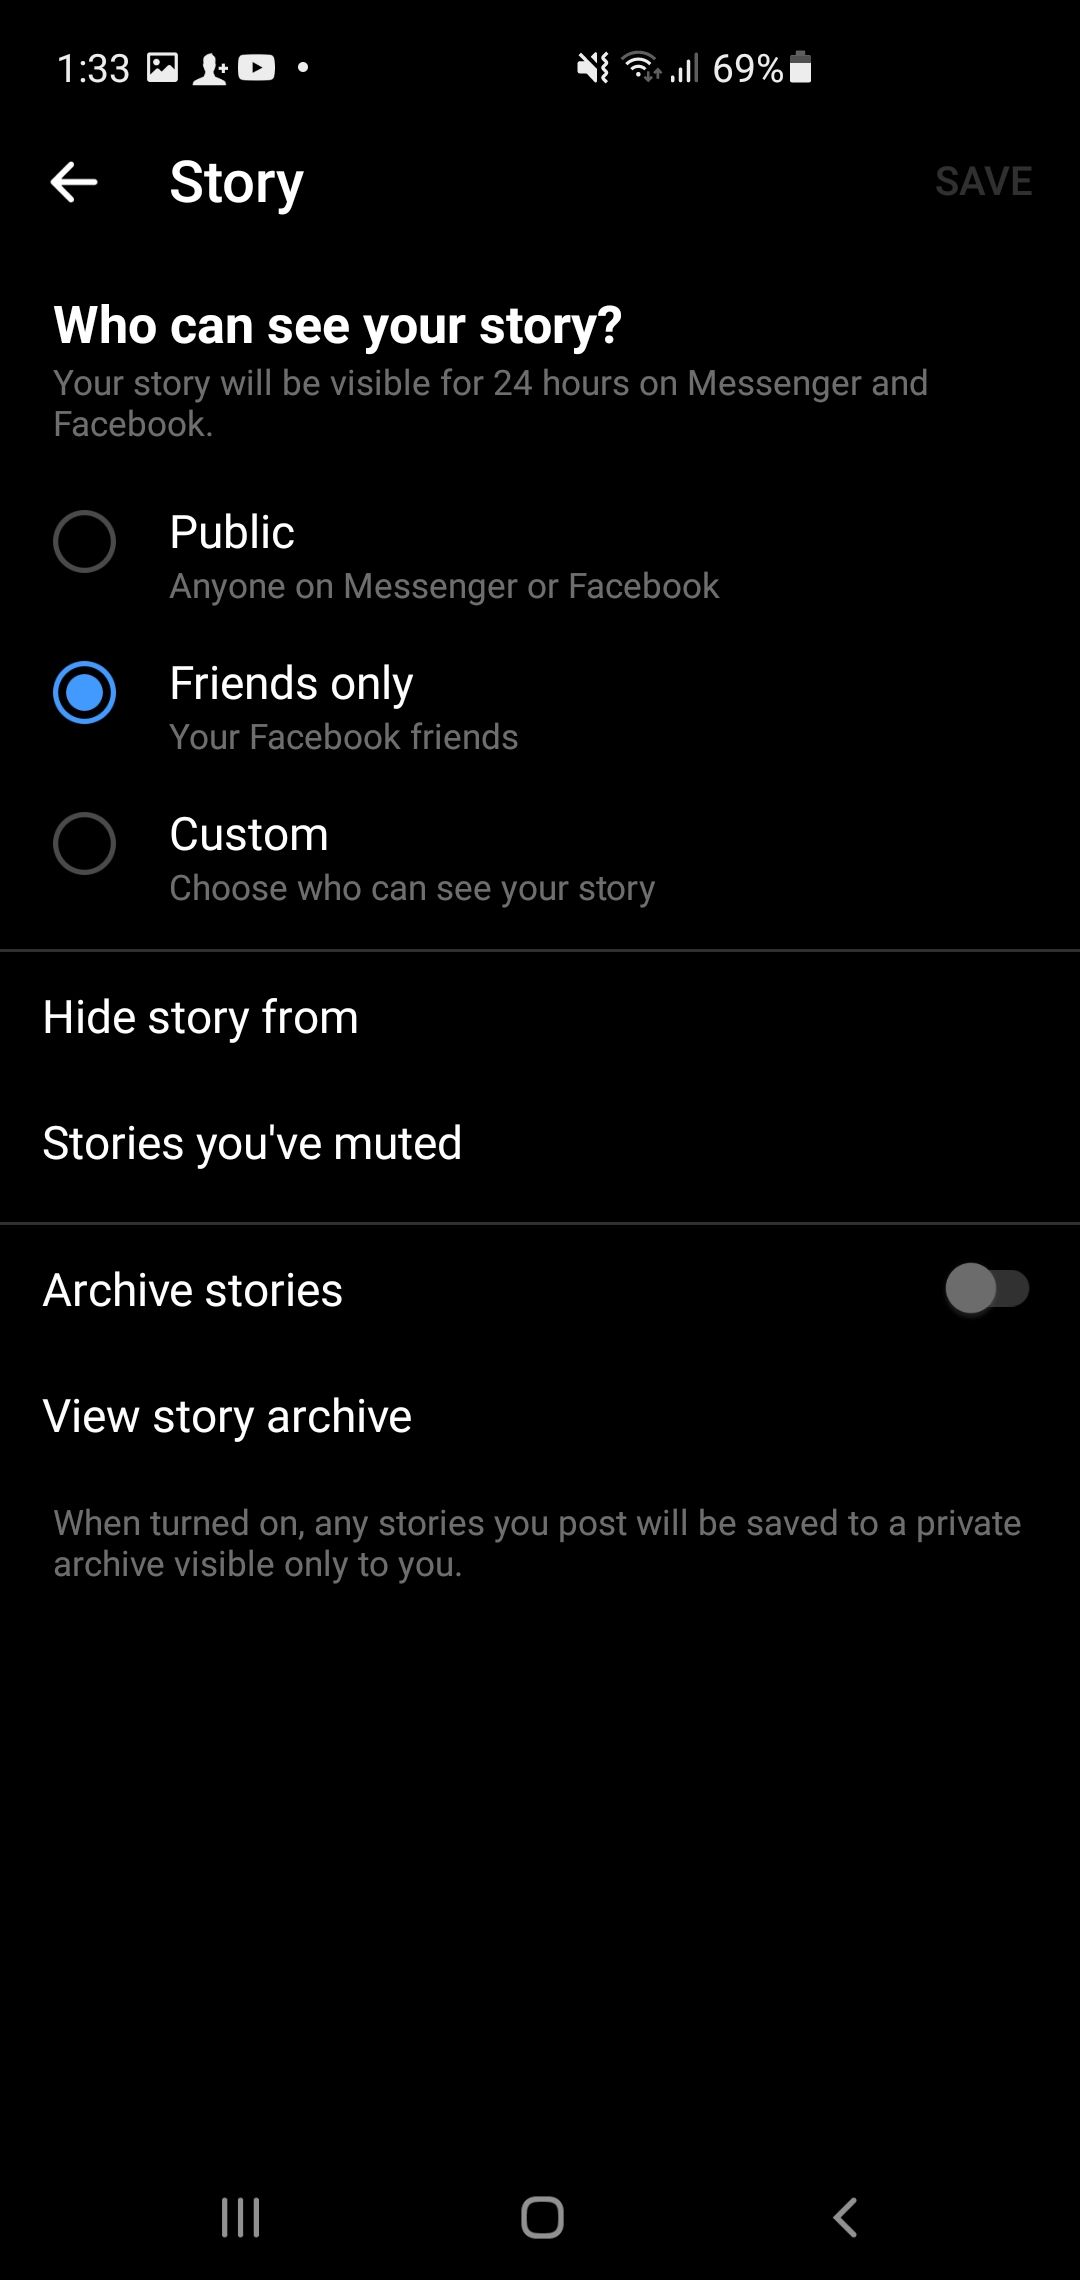 Who can see your story on Messenger